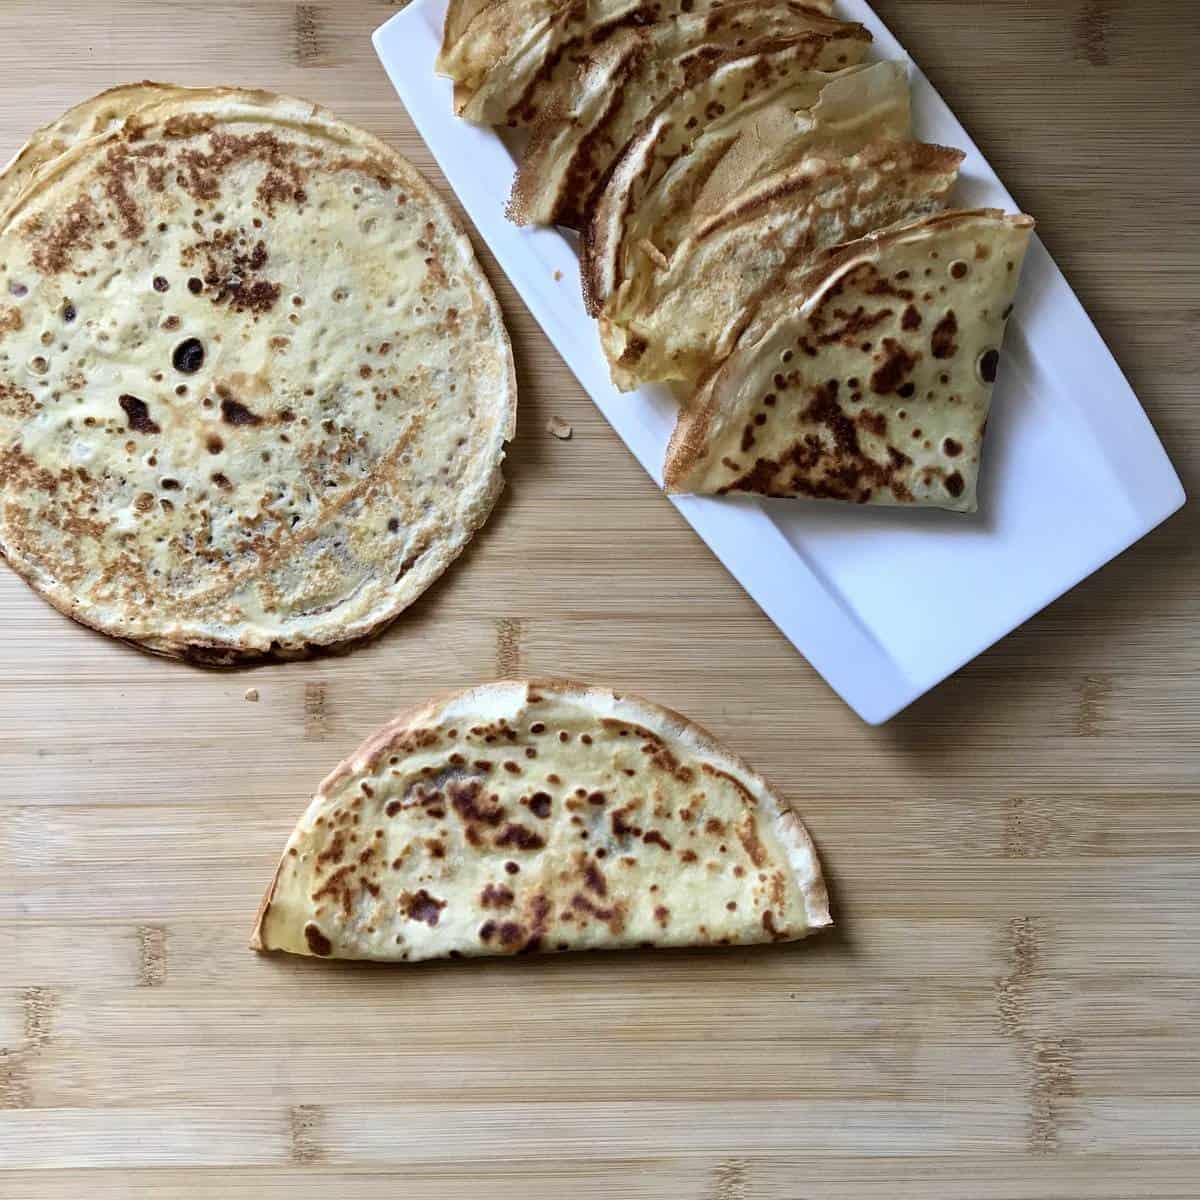 A thin crepe folded in half.